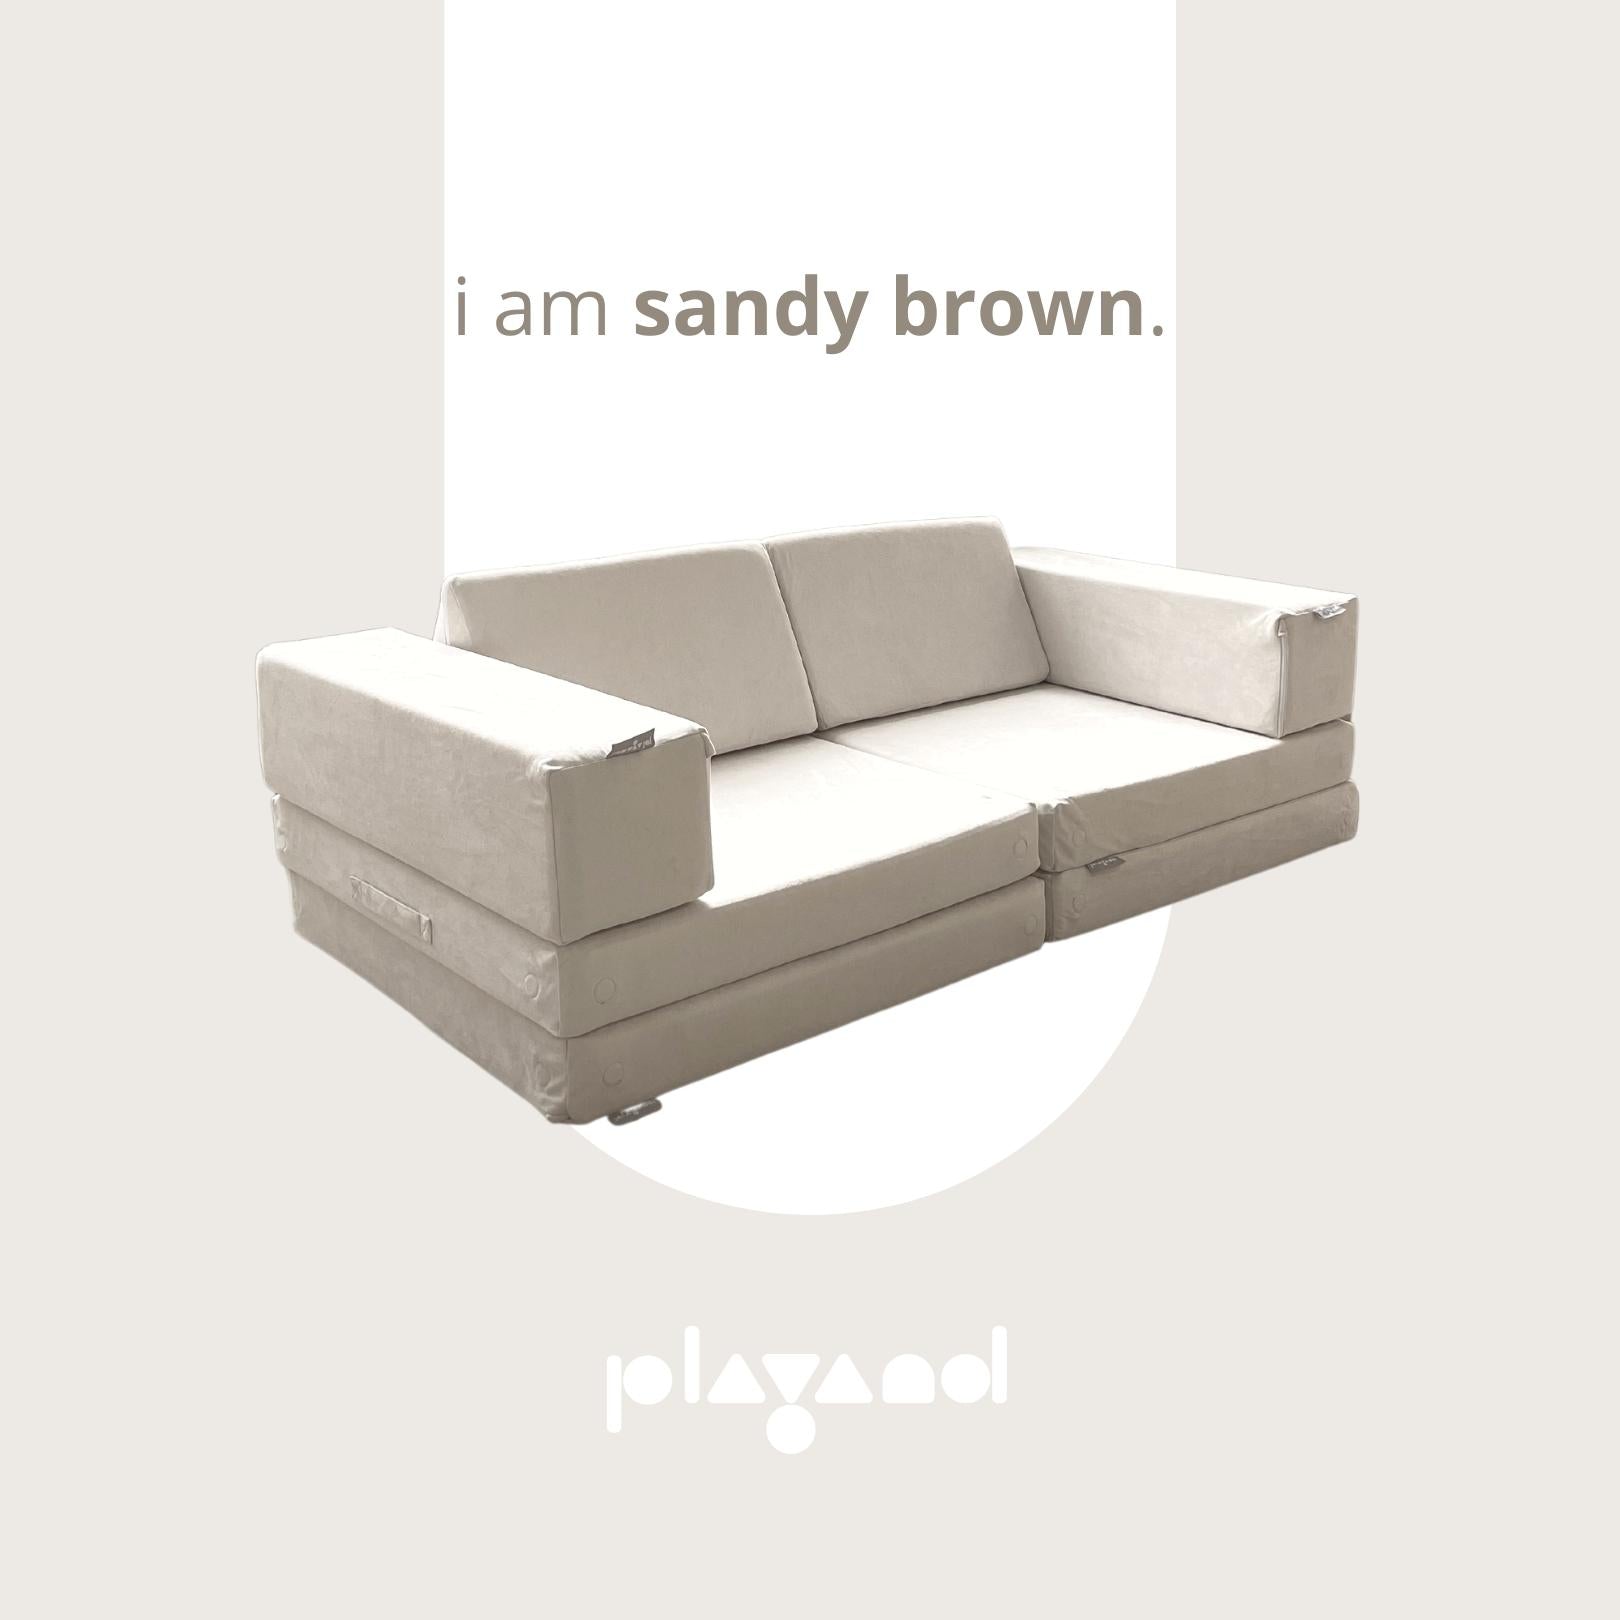 Playand Sofa In Sandy Brown